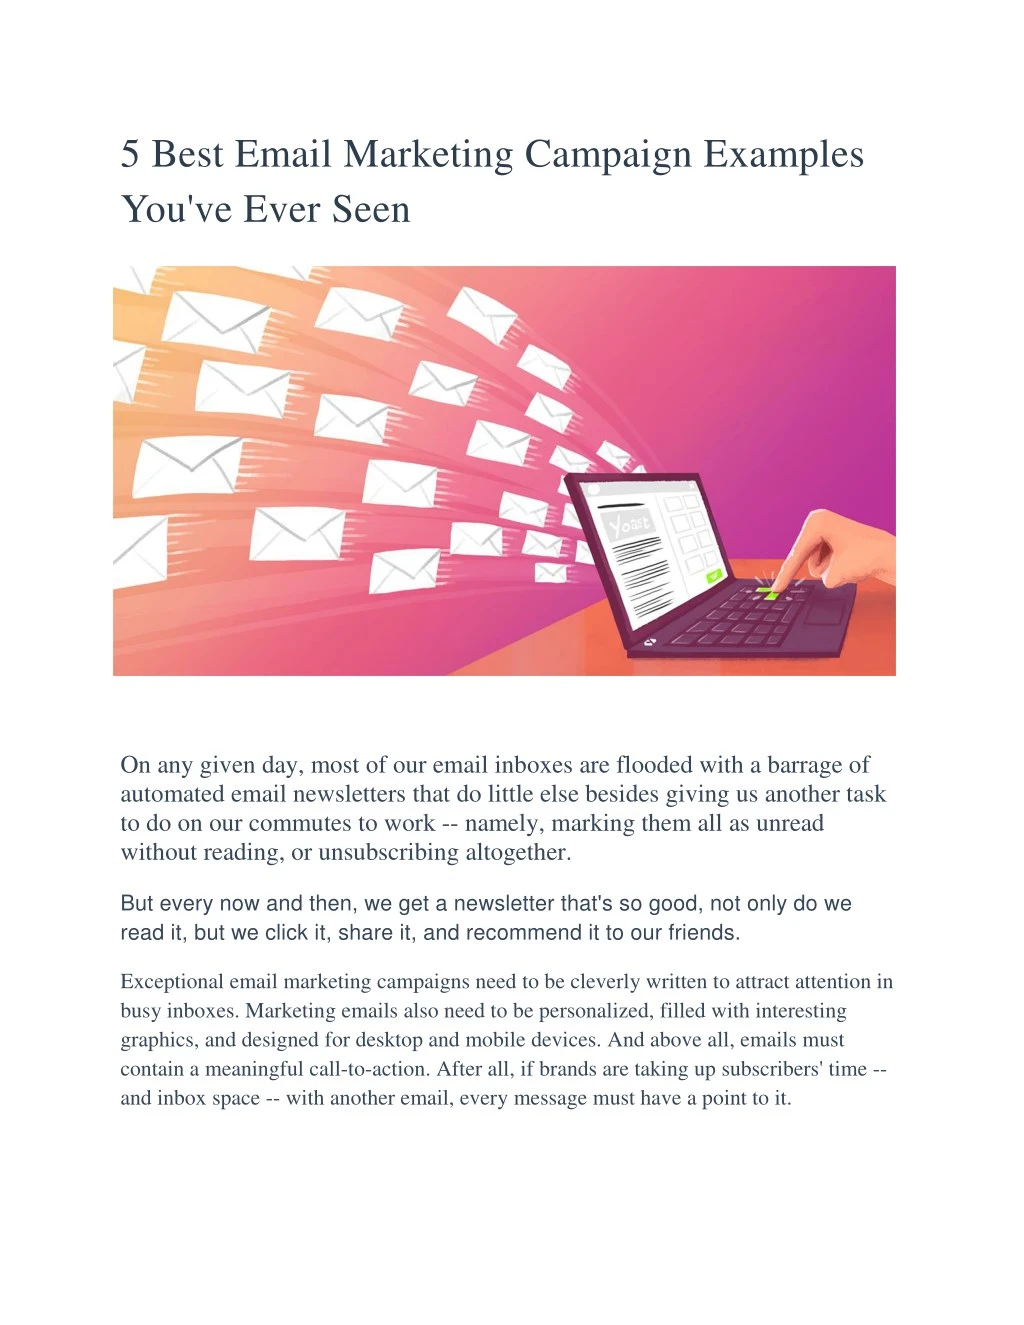 5 best email marketing campaign examples